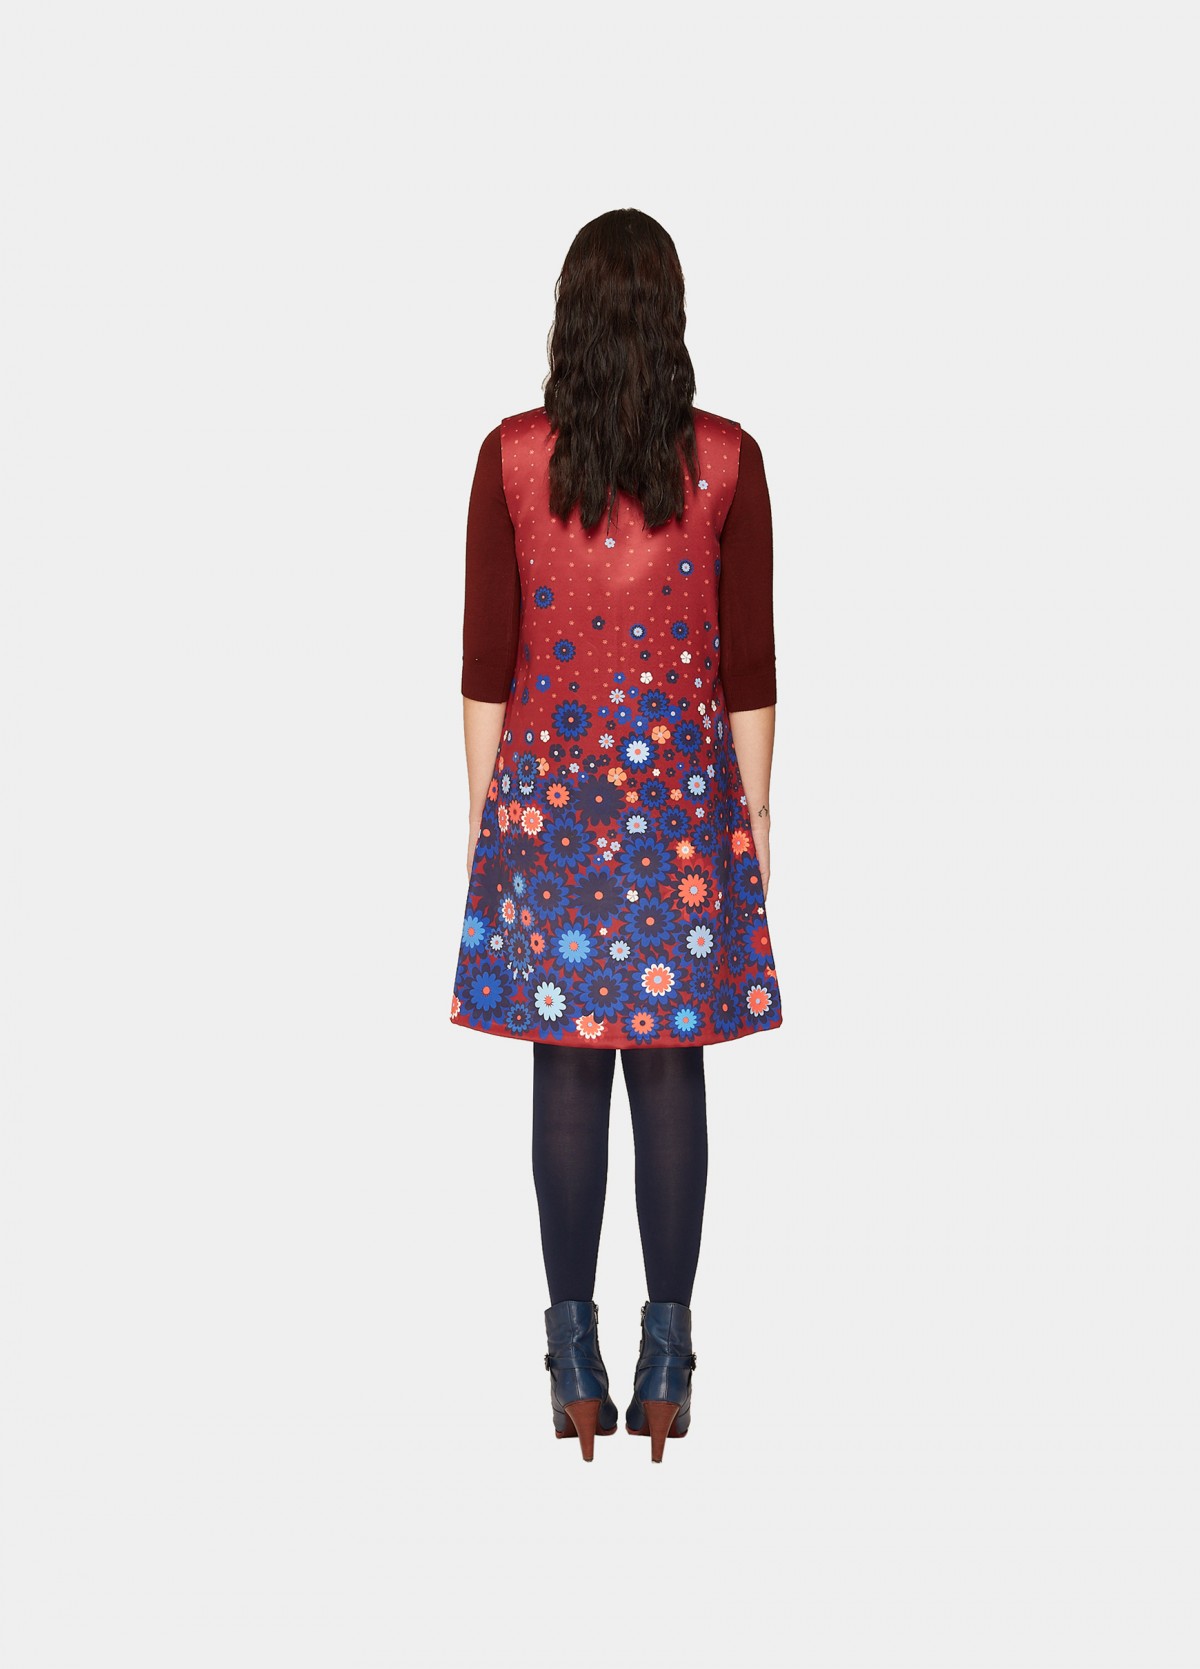 The Valley of Flowers Dress